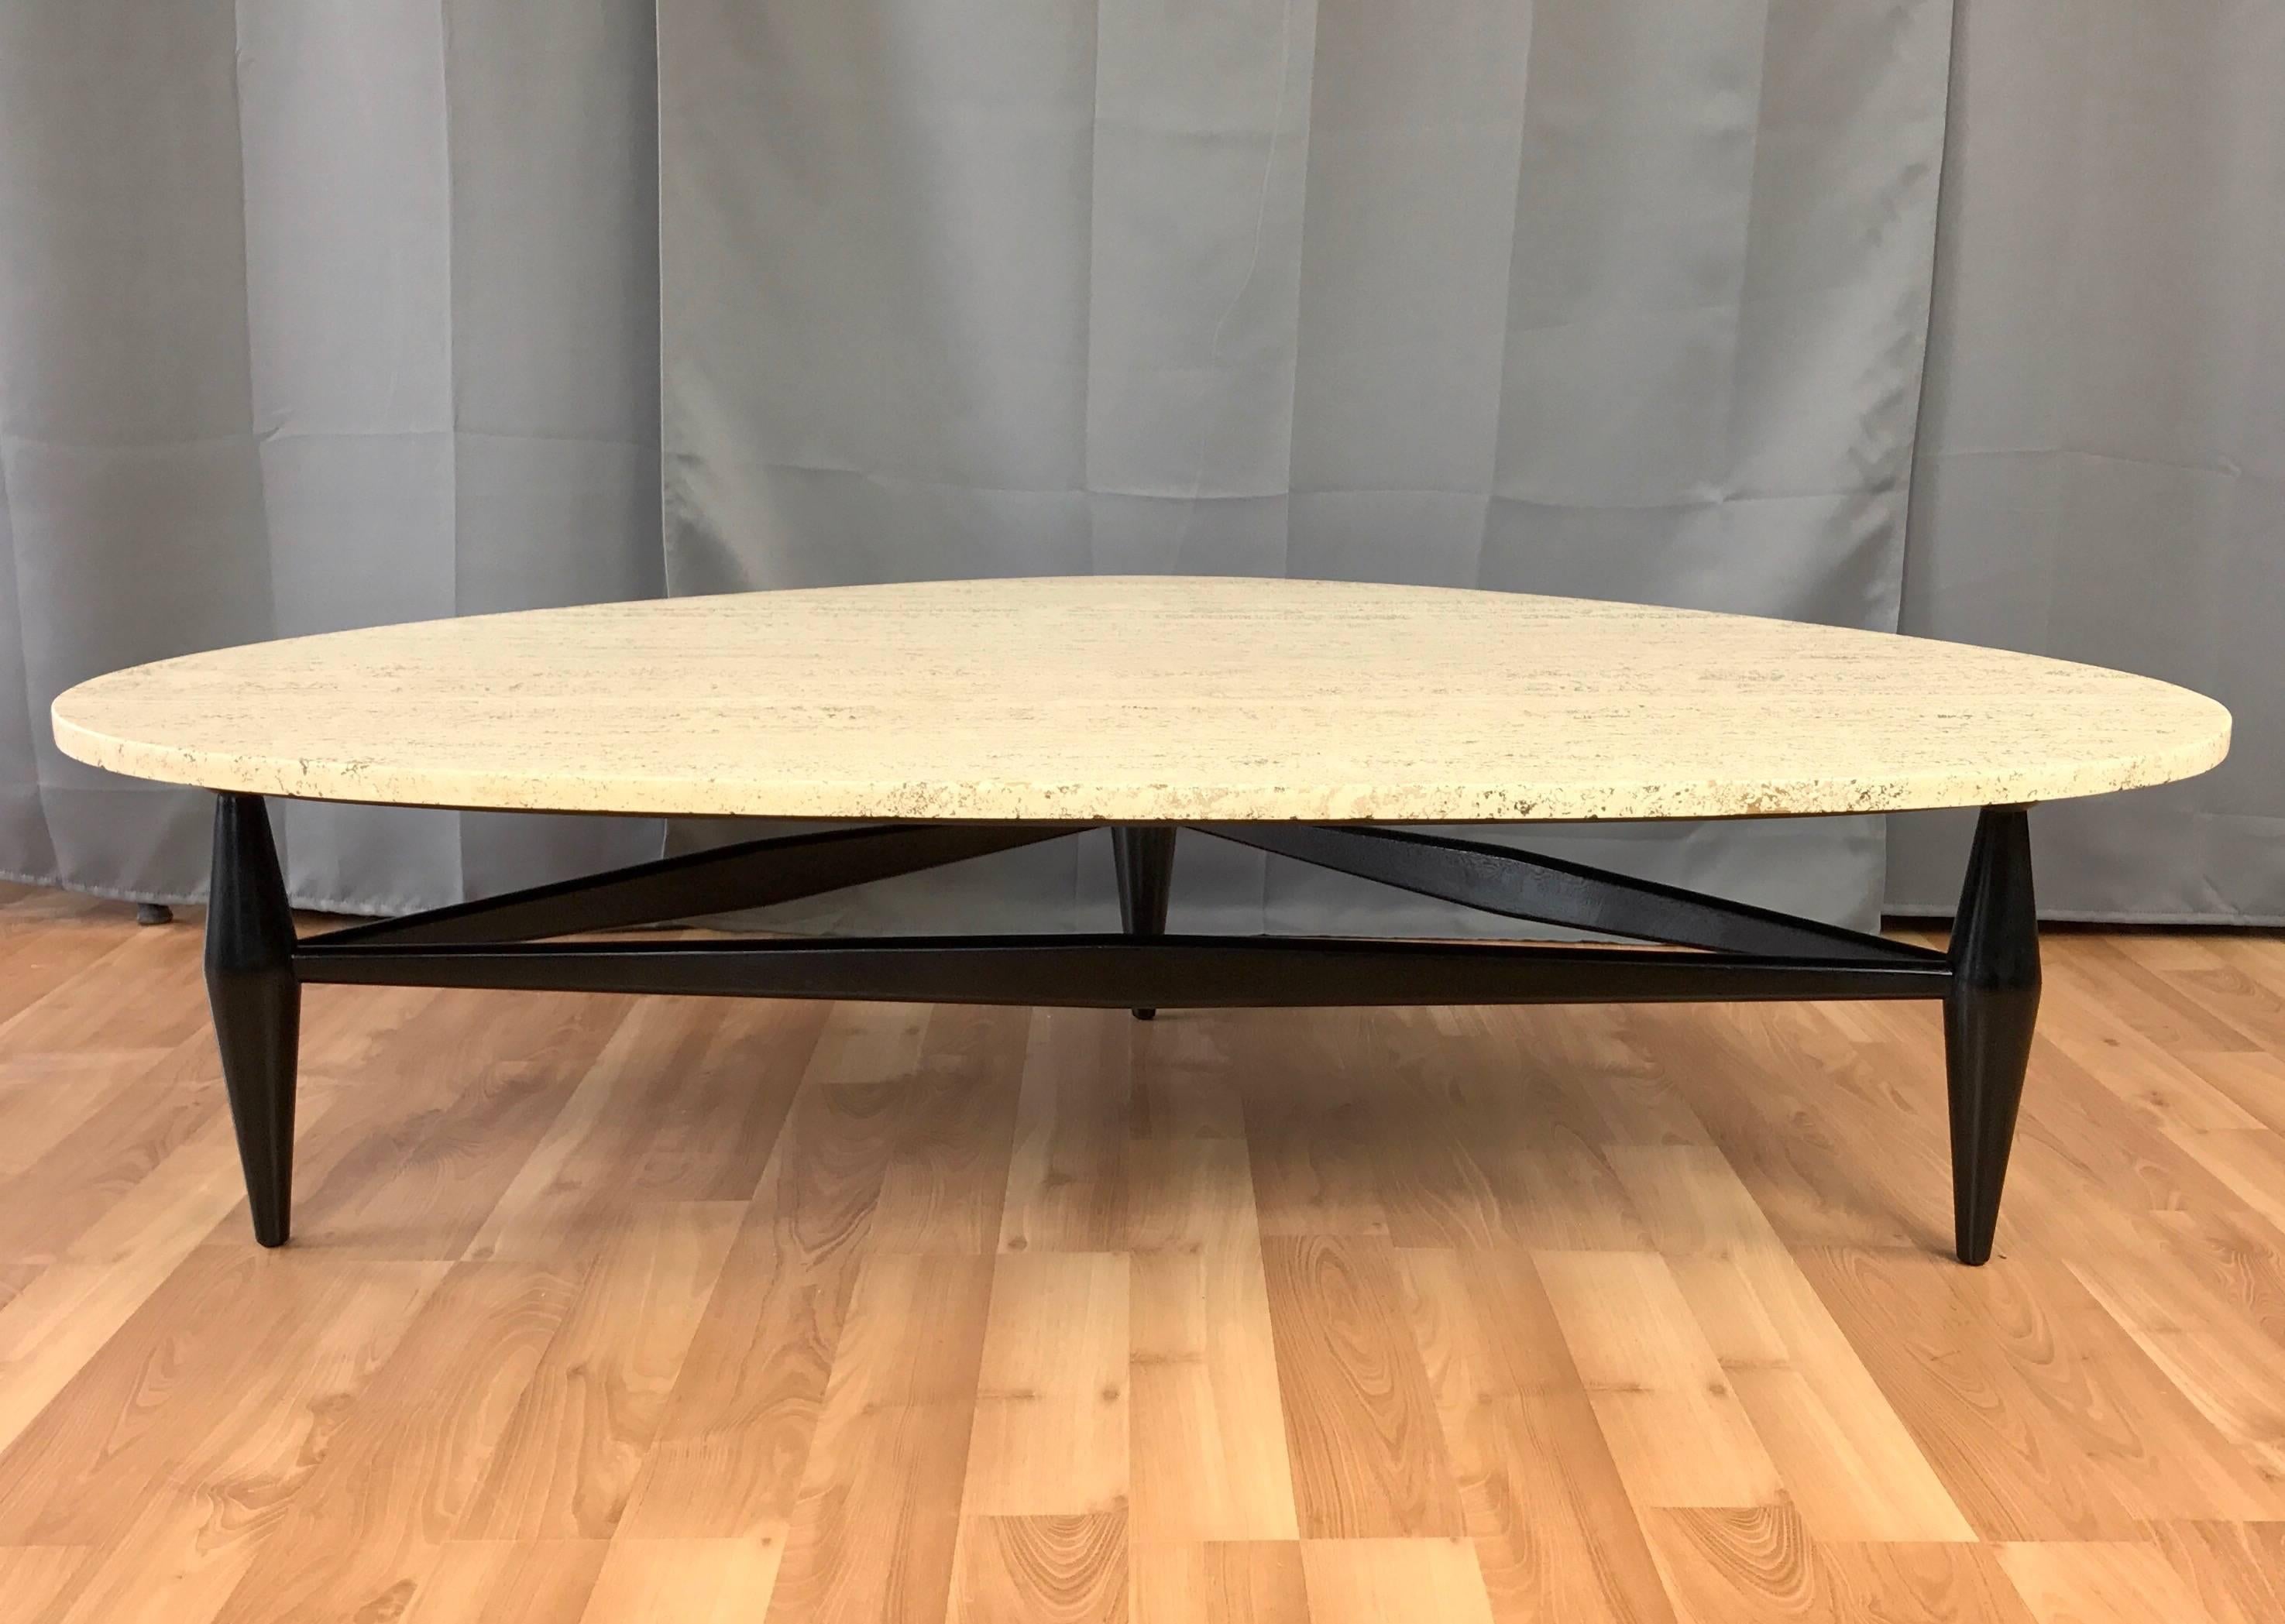 A very handsome Mid-Century travertine coffee table with a sculptural three-point black lacquered wood base.

Generously sized top is a three-sided ovoid slab of satin finish 3/4“ travertine with a very active and attractive pattern. It sits on a